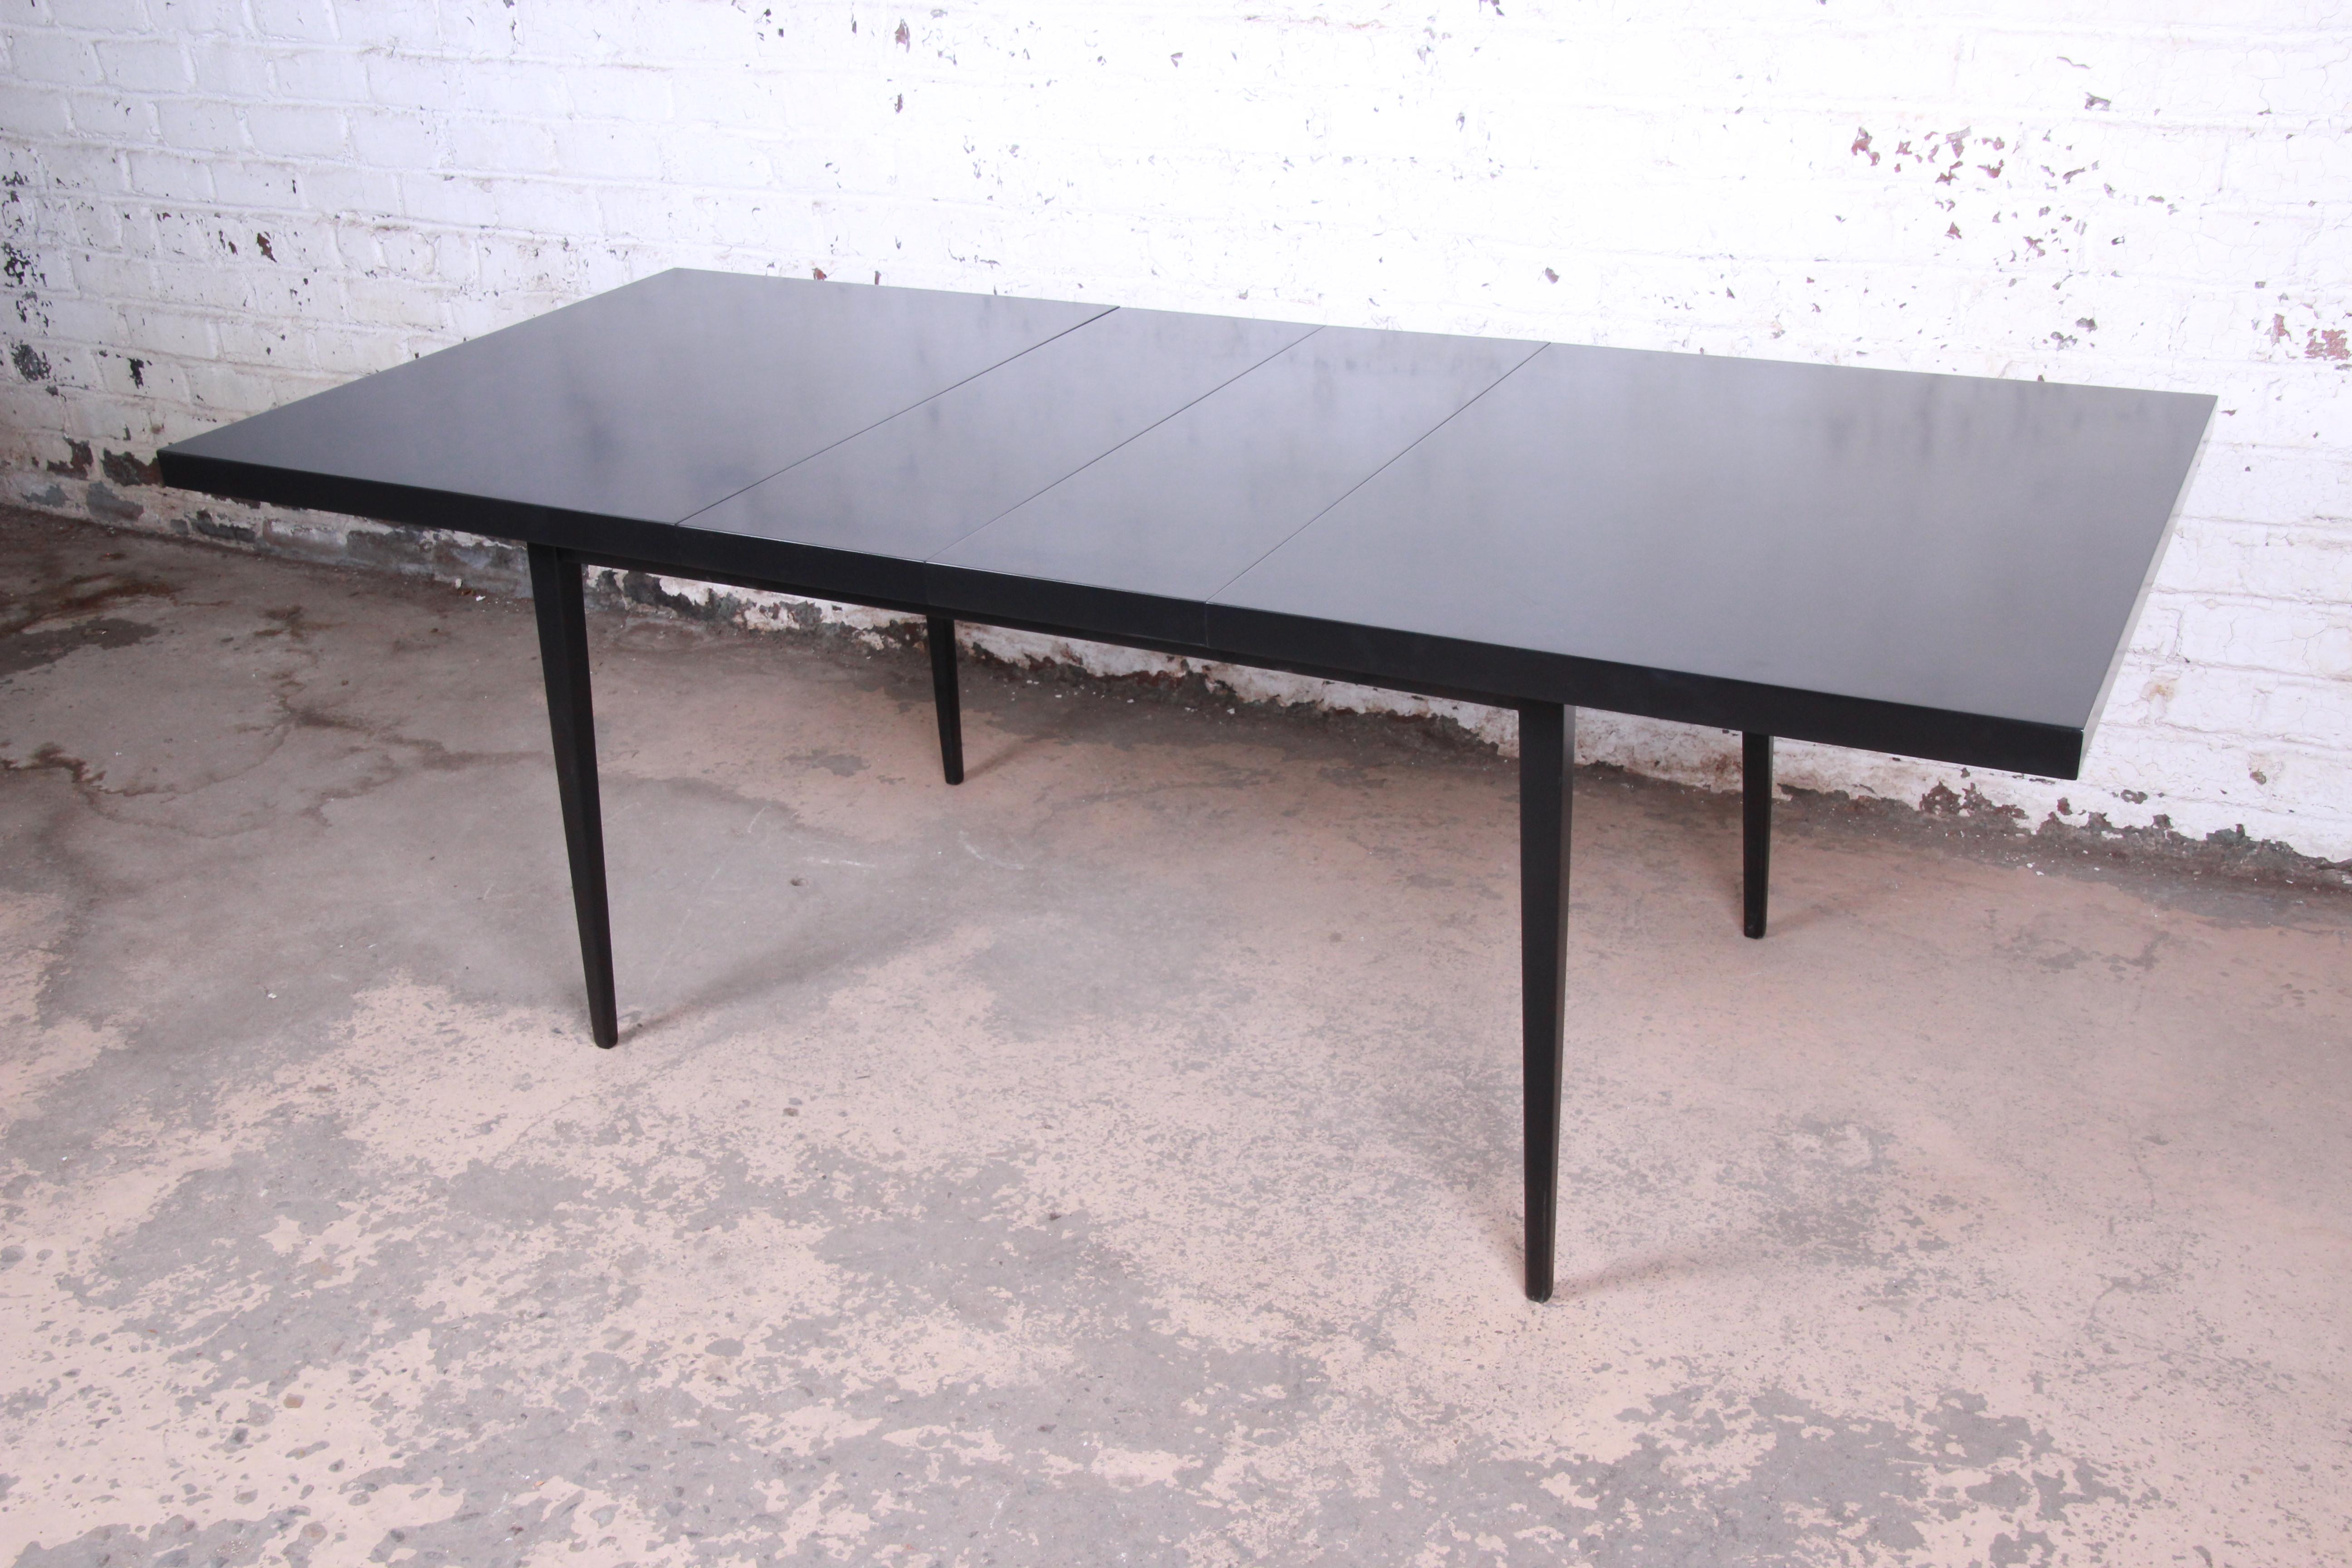 An exceptional Mid-Century Modern extension dining table

Designed by Paul McCobb for Winchendon Furniture 